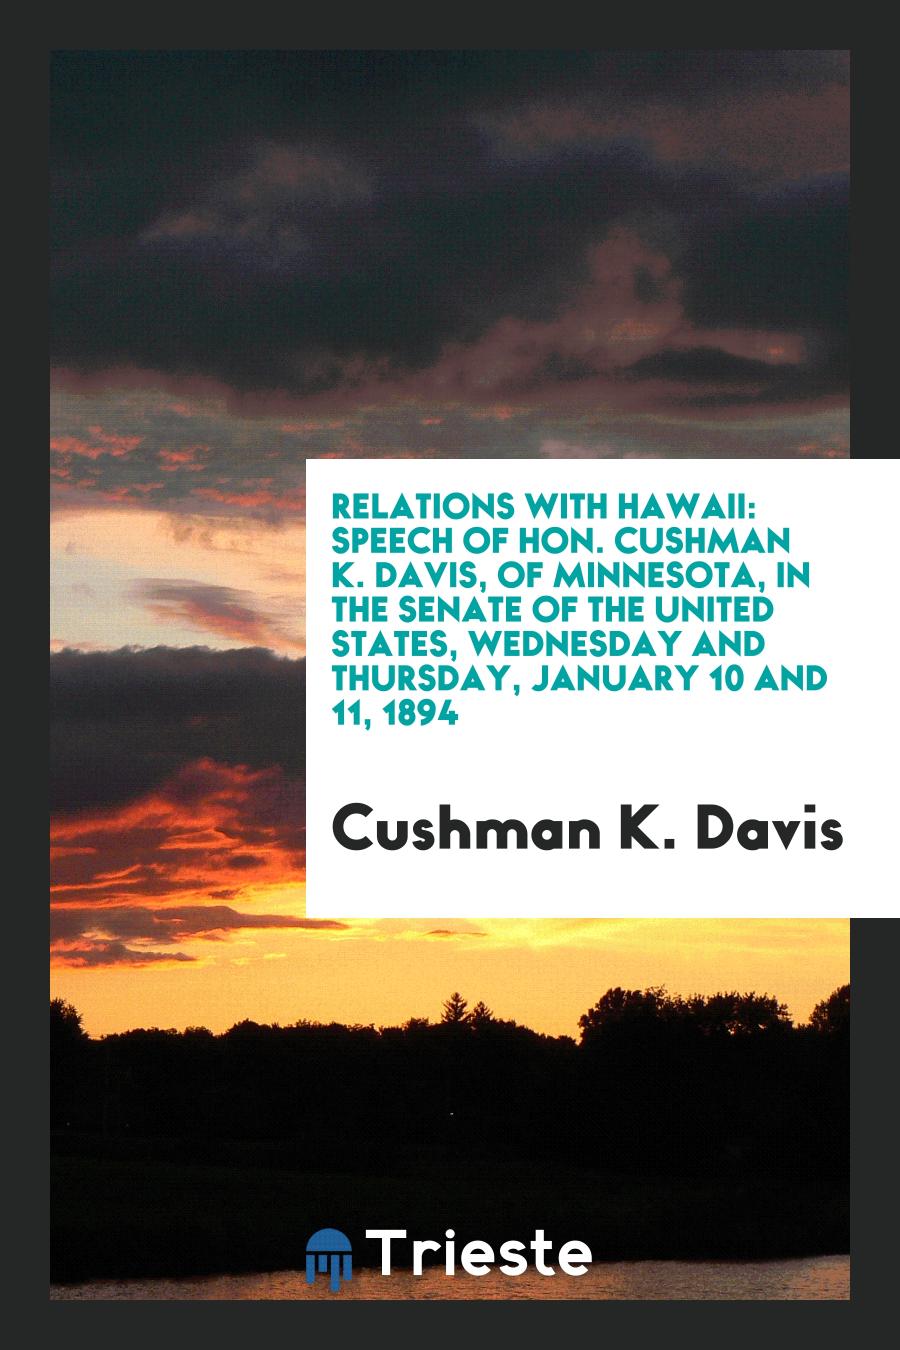 Relations with Hawaii: Speech of Hon. Cushman K. Davis, of Minnesota, in the Senate of the United States, Wednesday and Thursday, January 10 and 11, 1894